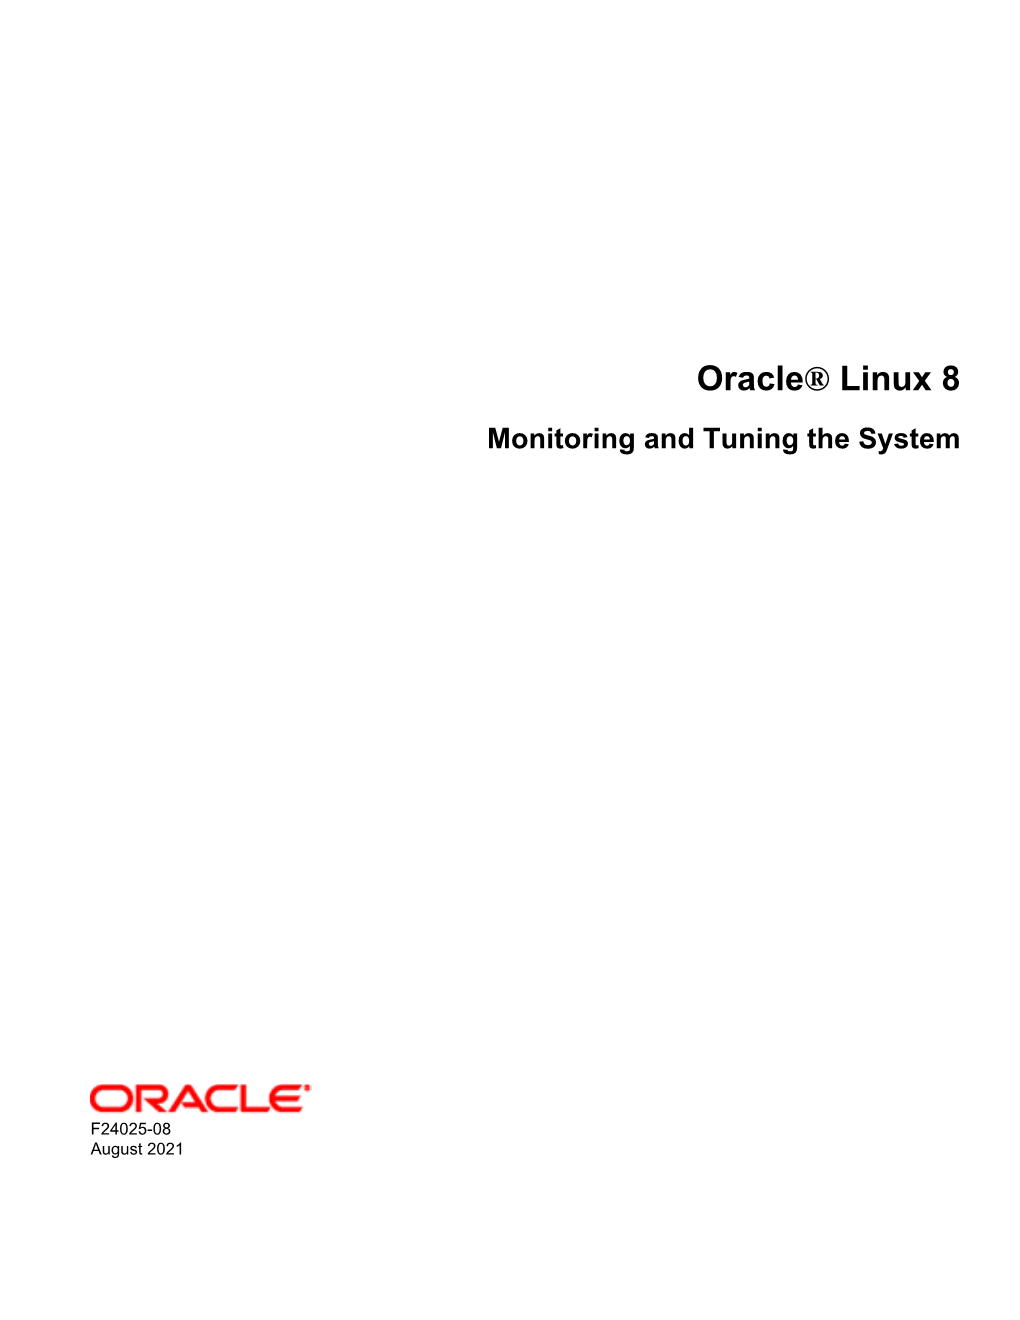 Oracle® Linux 8 Monitoring and Tuning the System